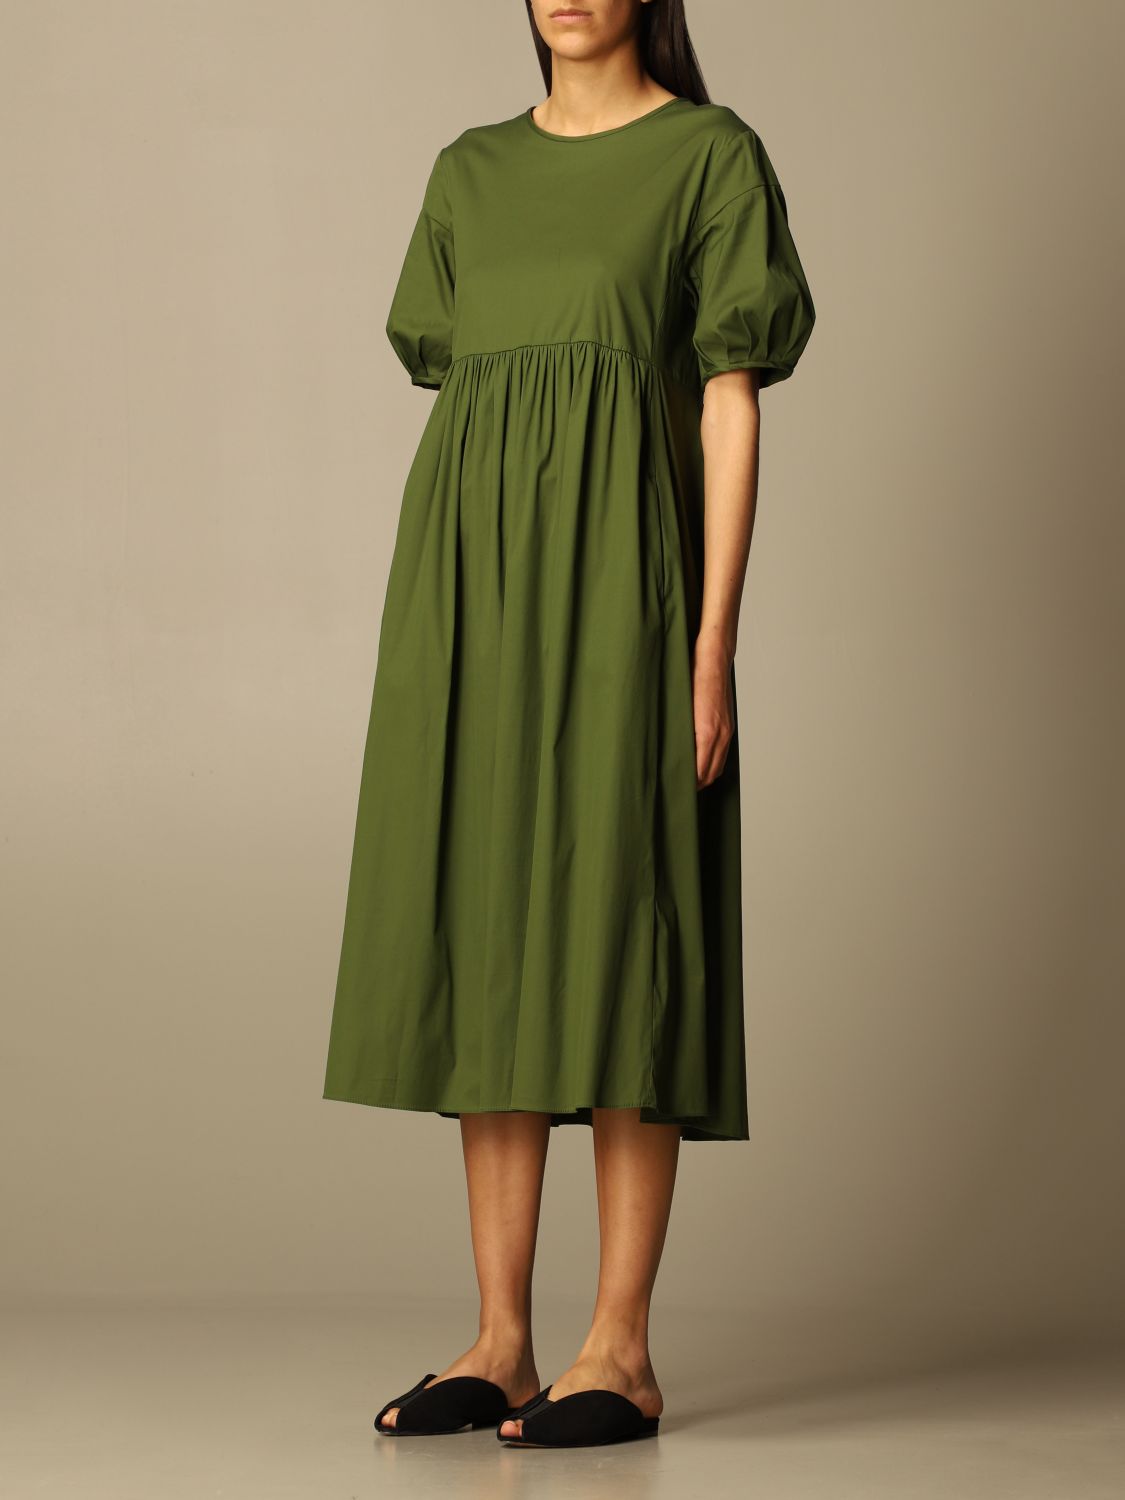 S Max Mara Outlet: dress in cotton blend - Military | S Max Mara dress ...